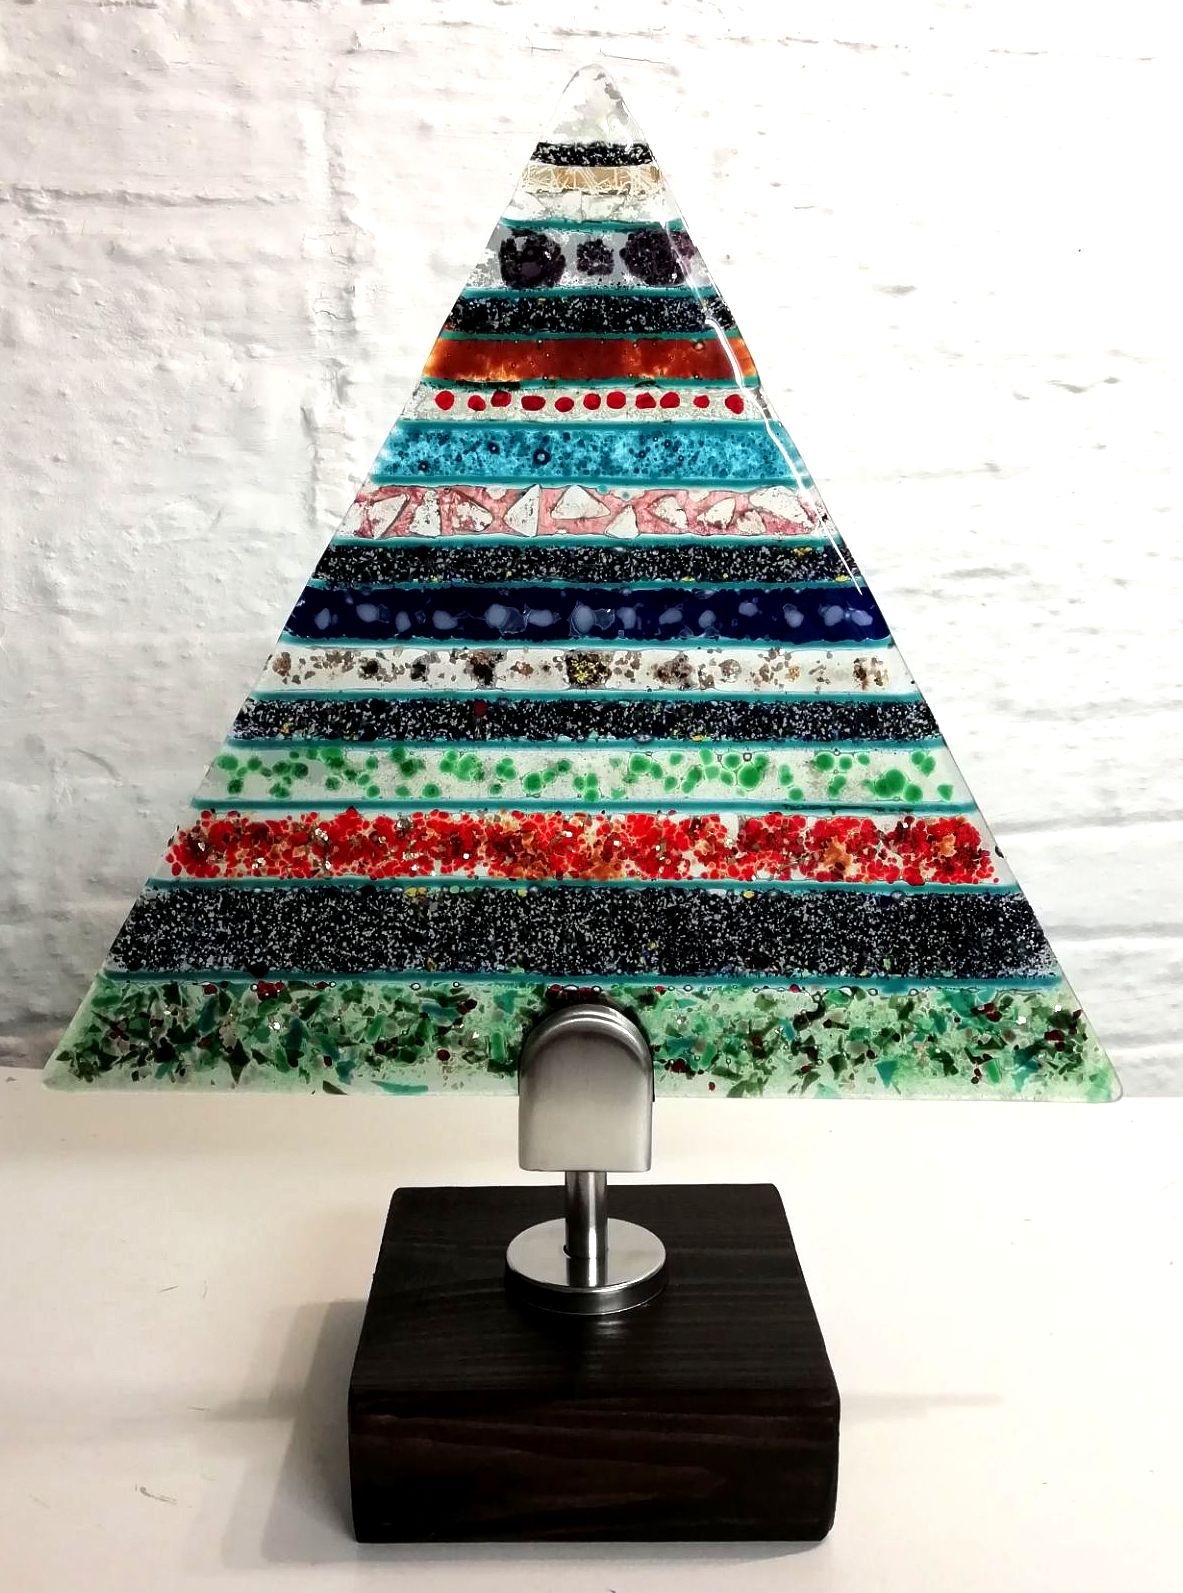 826 Make A Standing Fused Glass Christmas Tree - Friday 5th November 2022, 